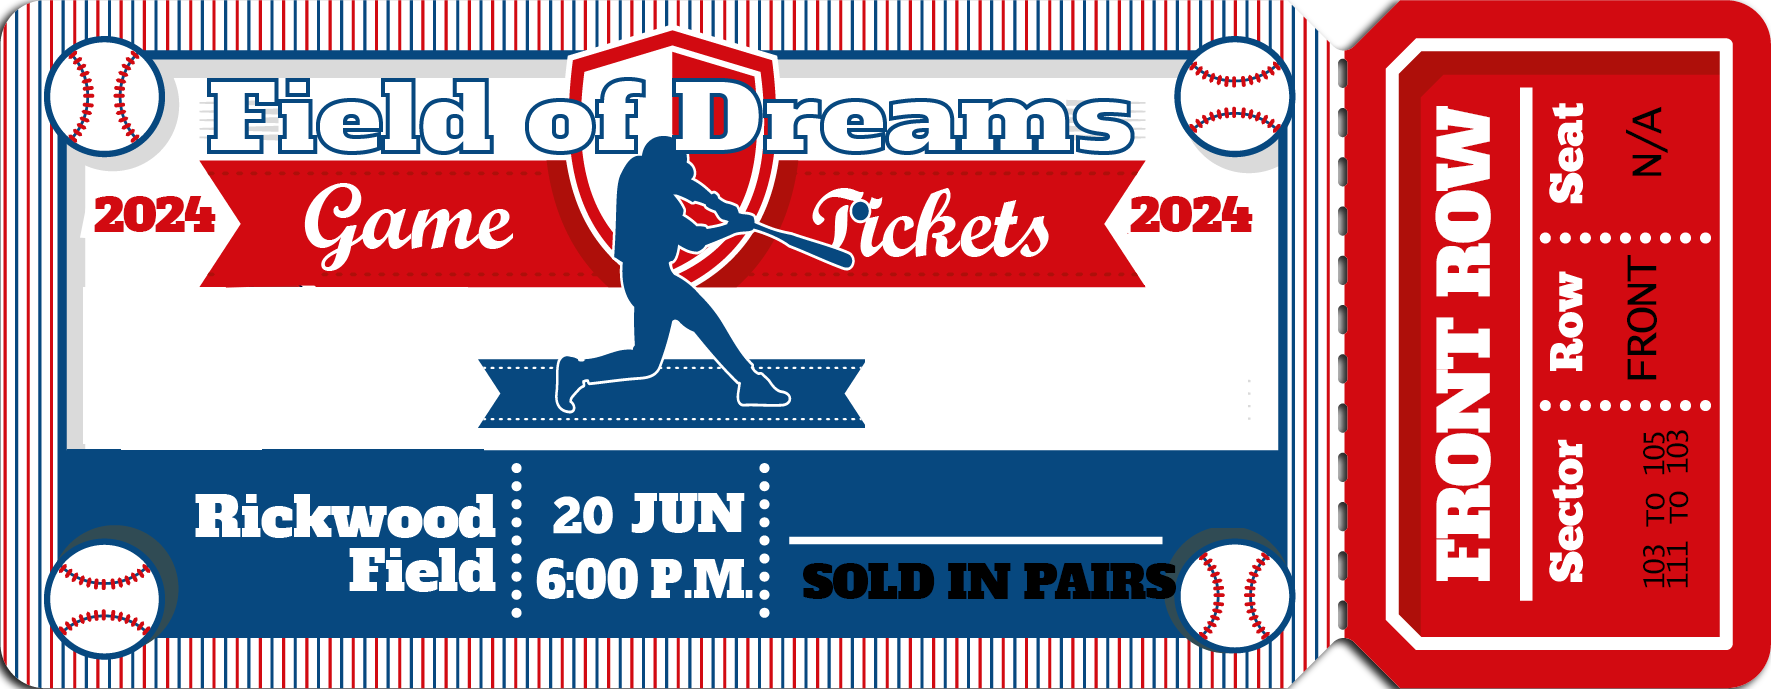 Get your Field of Dreams Game Tickets for 2024 Game in Rickwood Field @ Birmingham Alabama now!